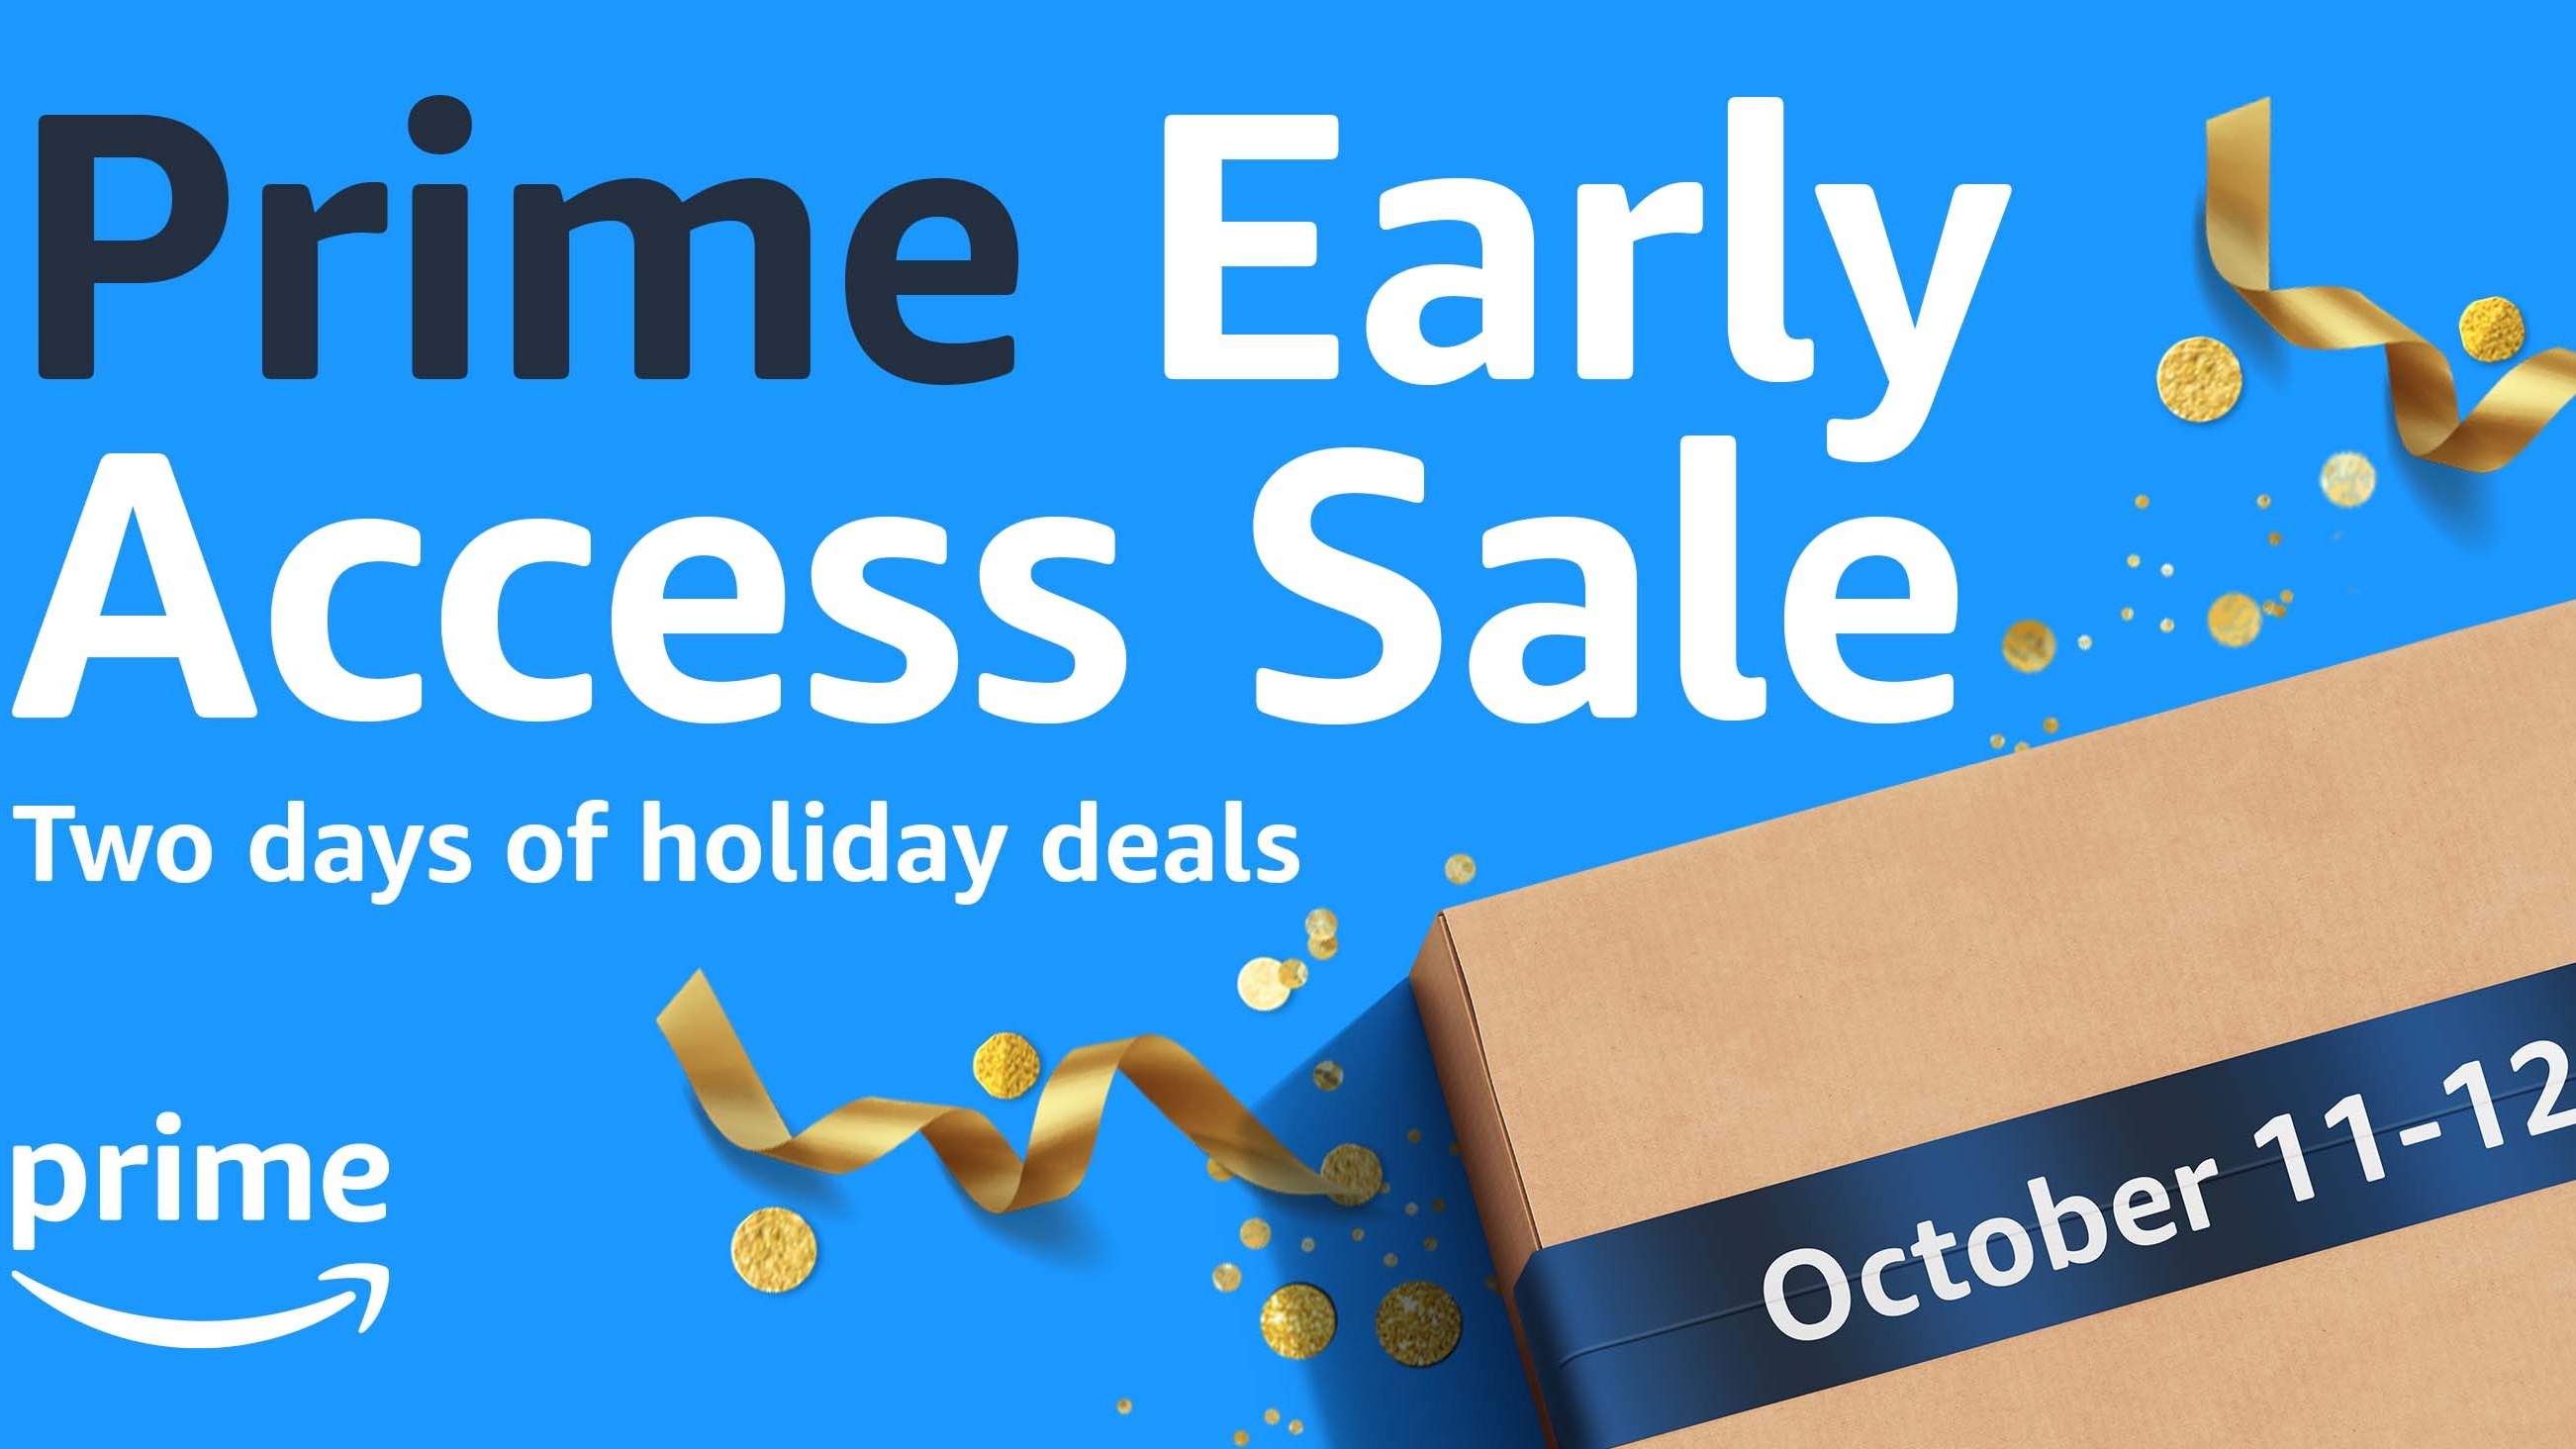 Prime Early Access Sale: Dates, What to Look for, and More